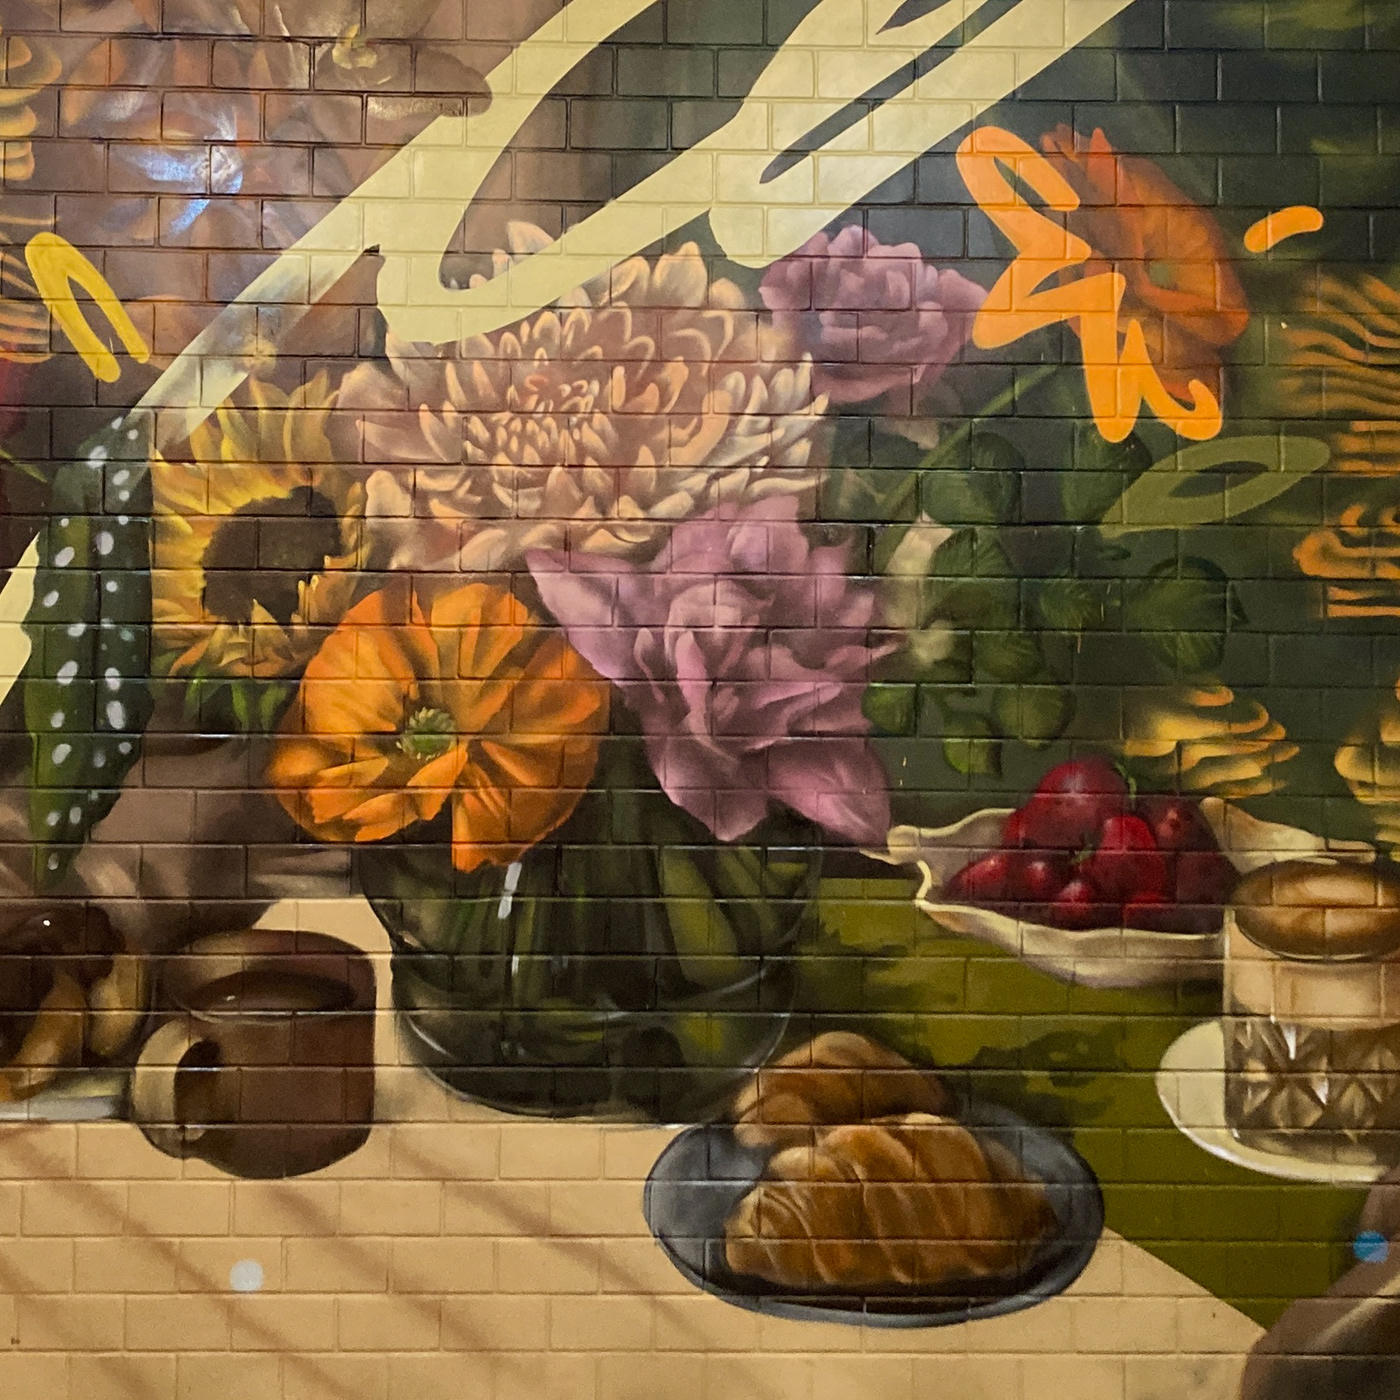 pastry cafe Mural still life kookoo ramos philippines Coffee baguio city Cream puff Victoria Bakery